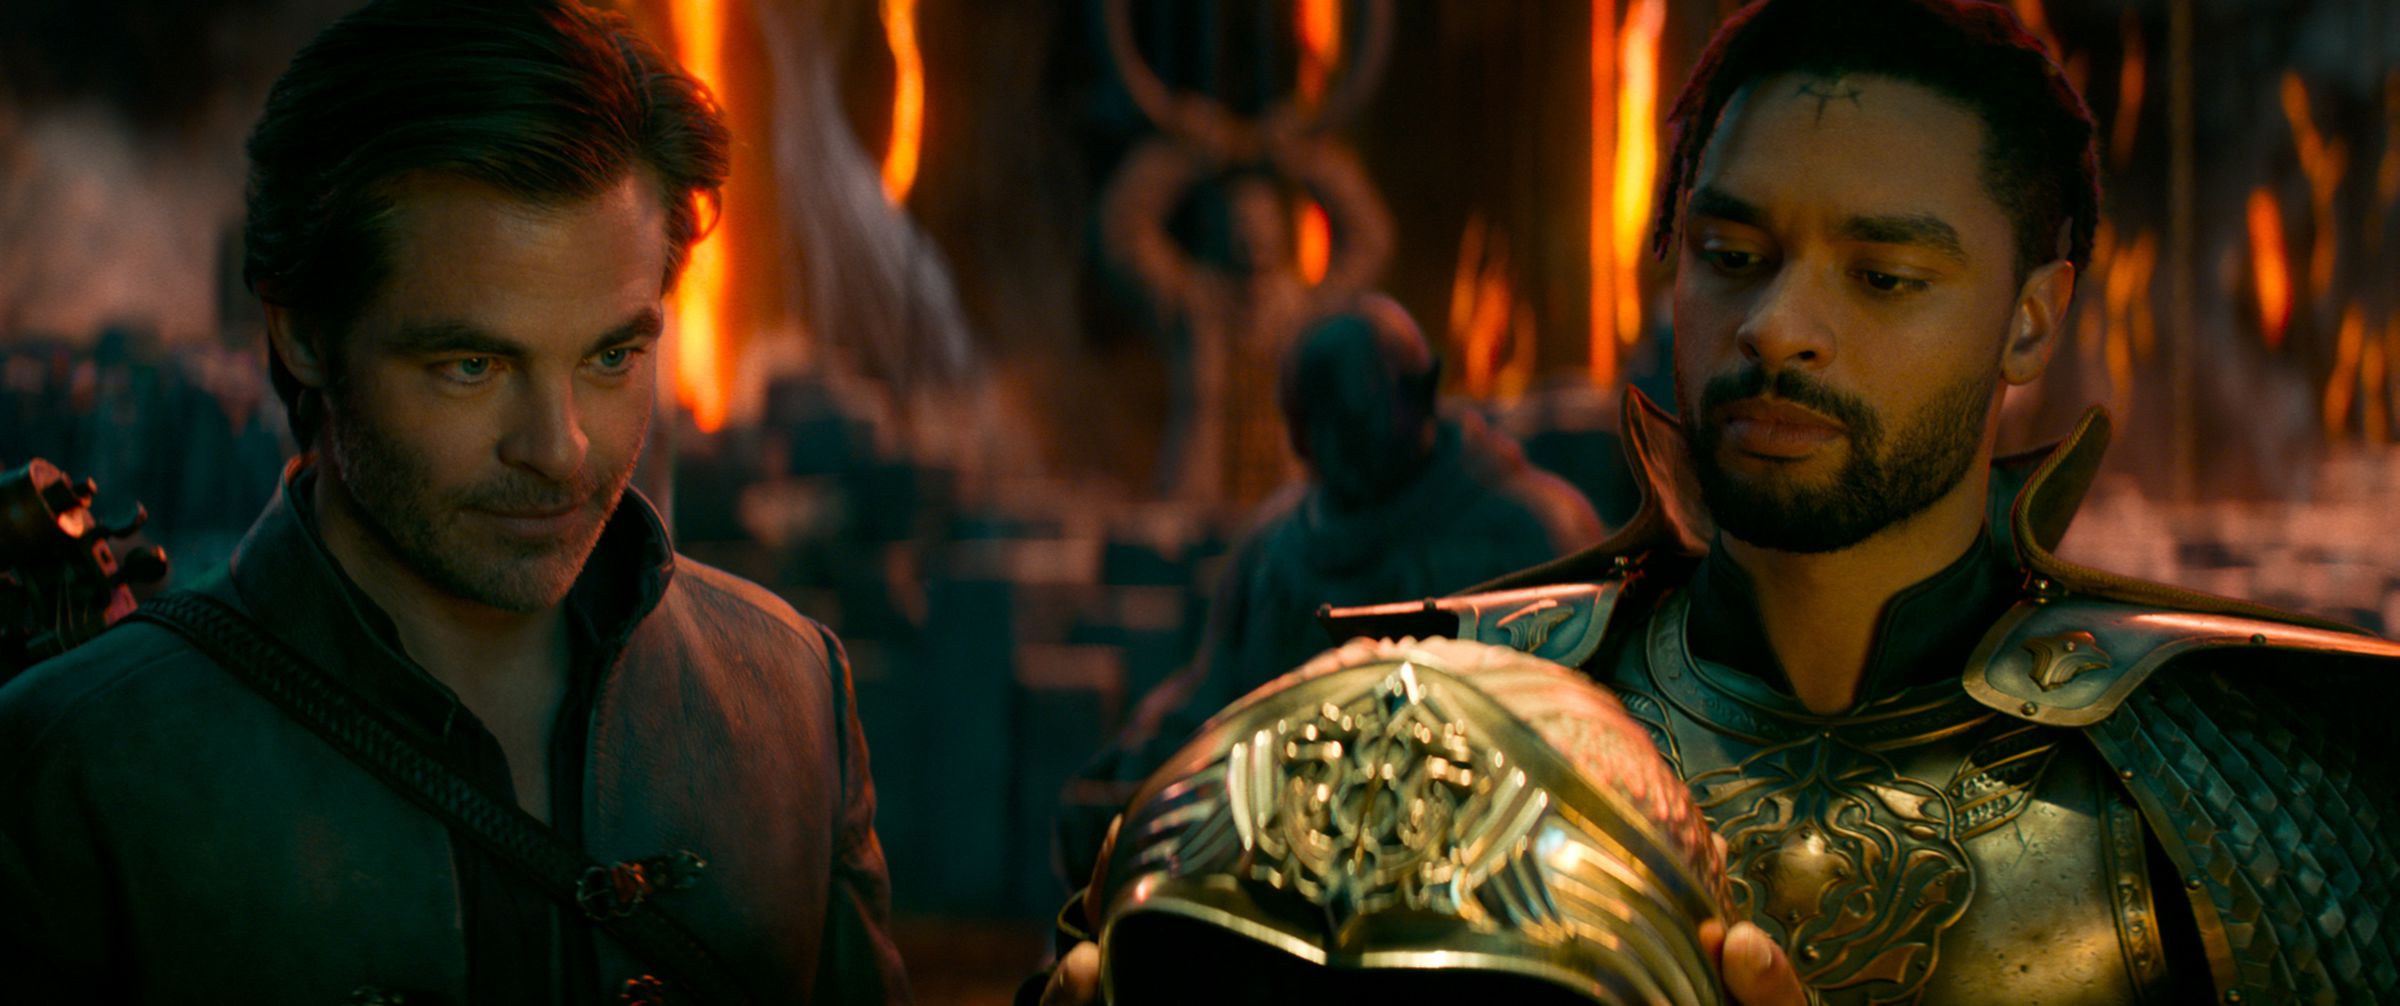 Chris Pine as Edgin Darvis and Regé-Jean Page as Xenk Yendar in Paramount’s Dungeons &amp; Dragons: Honor Among Thieves